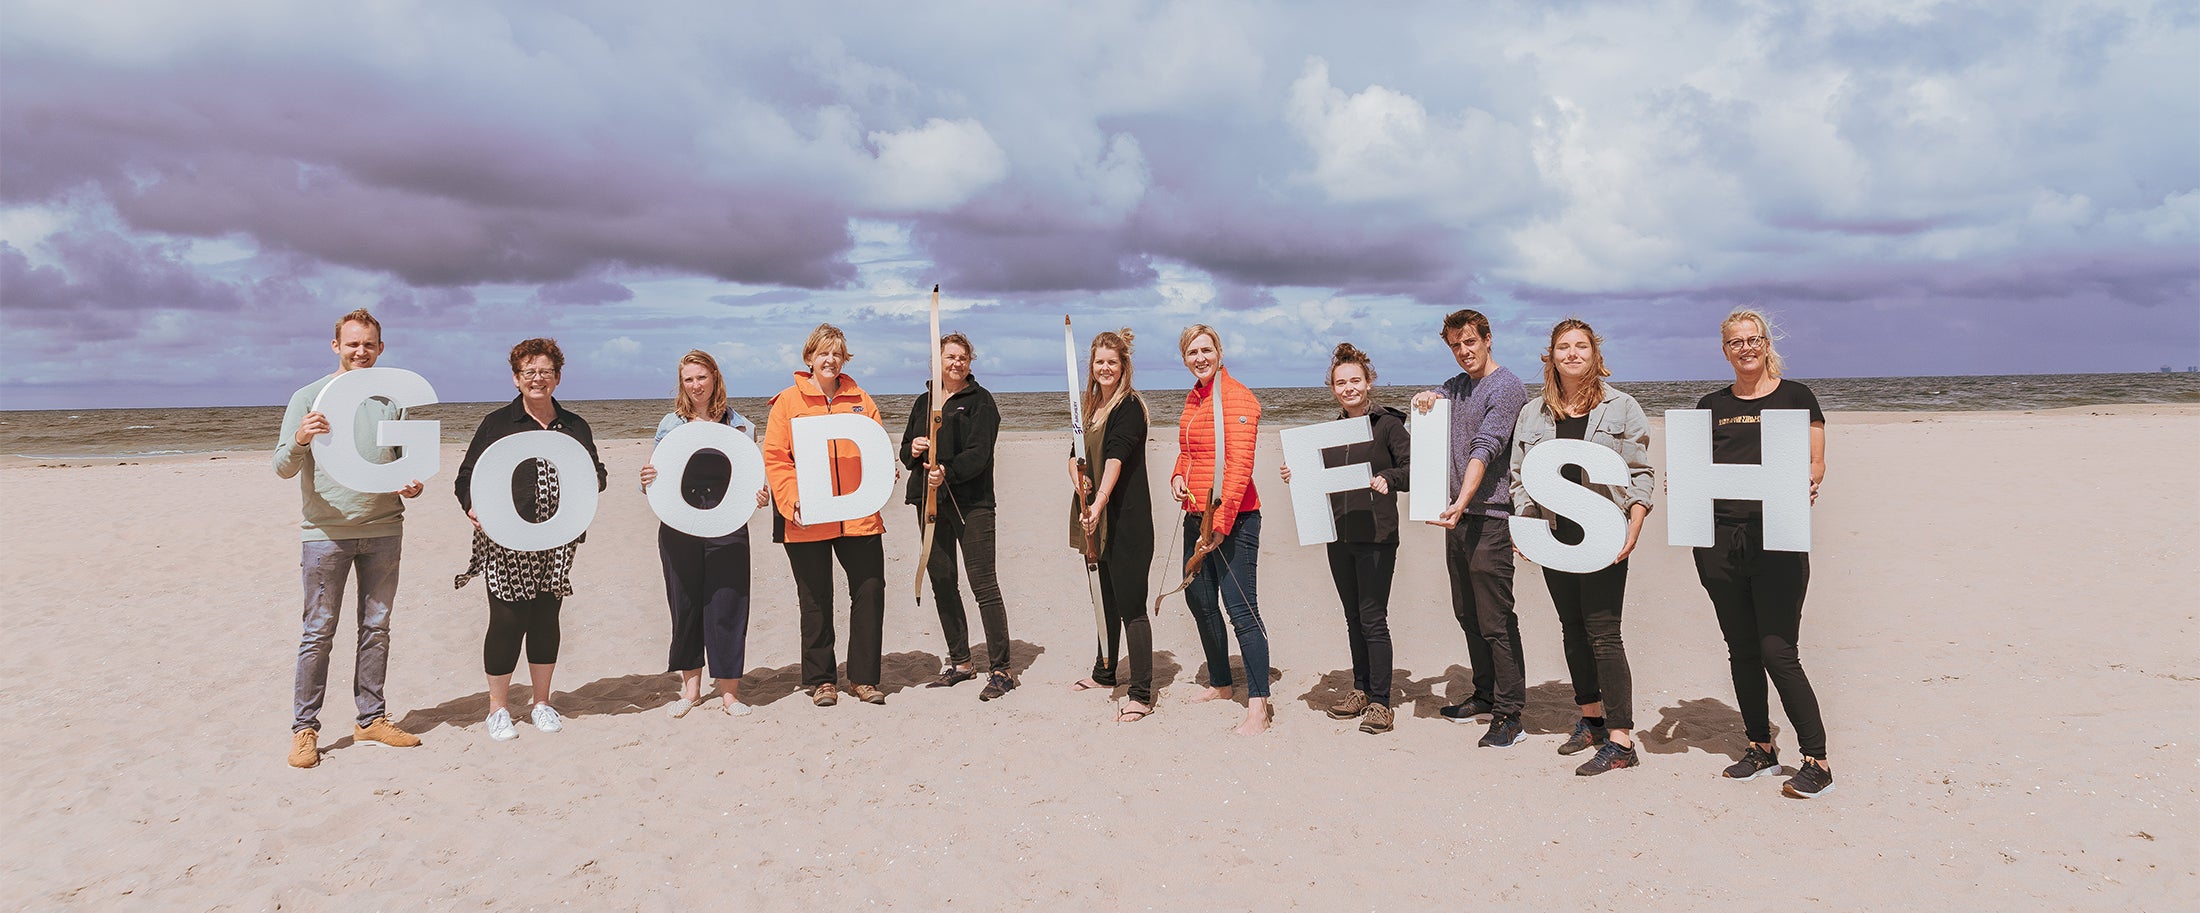 The scientists and crew from the Good Fish Foundation stand on a beach, holding letters that spell their organization's name